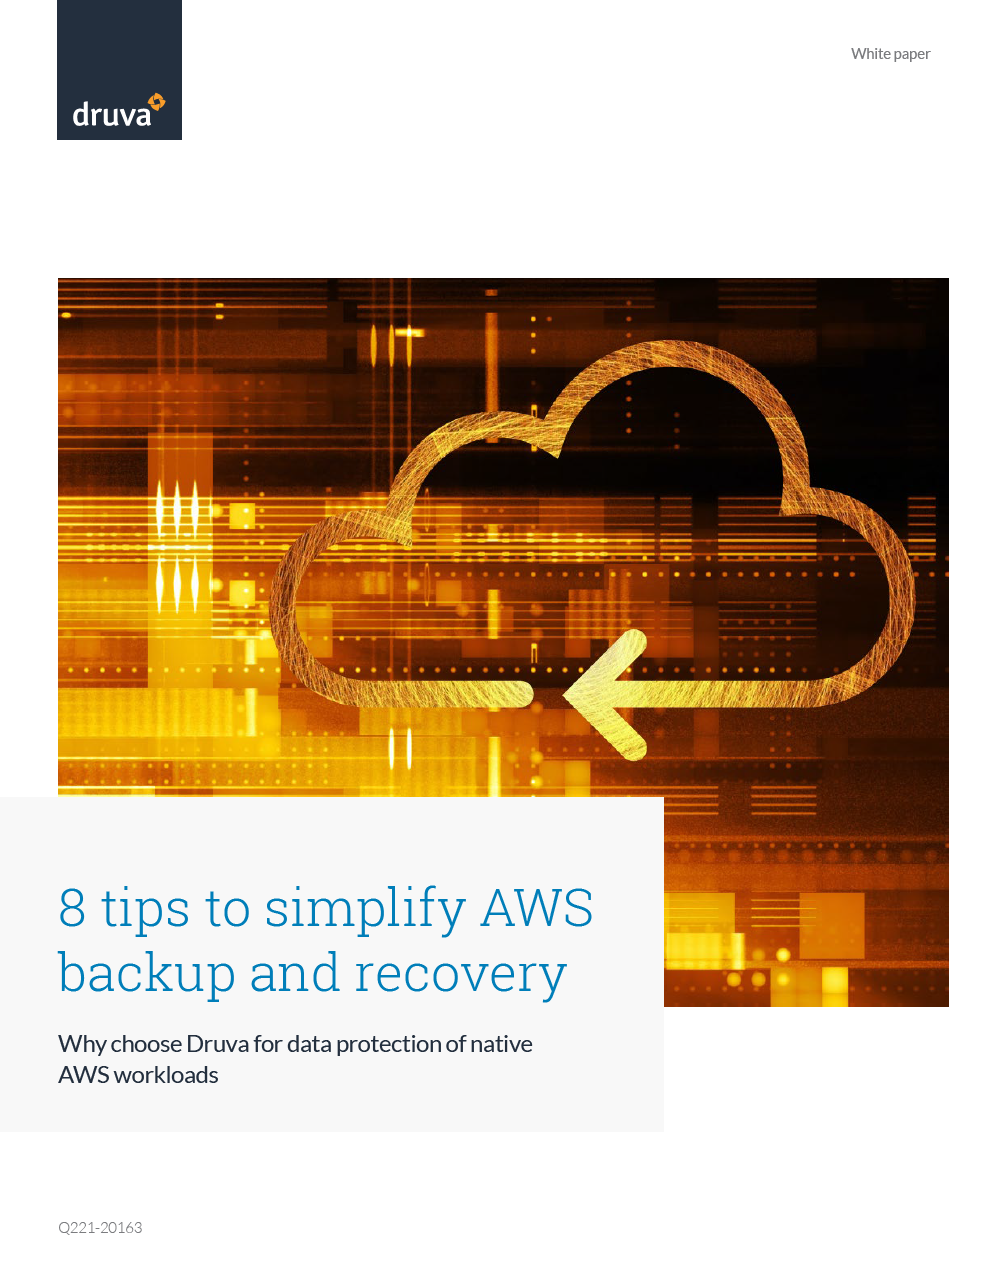 8 tips to simplify AWS backup and recovery